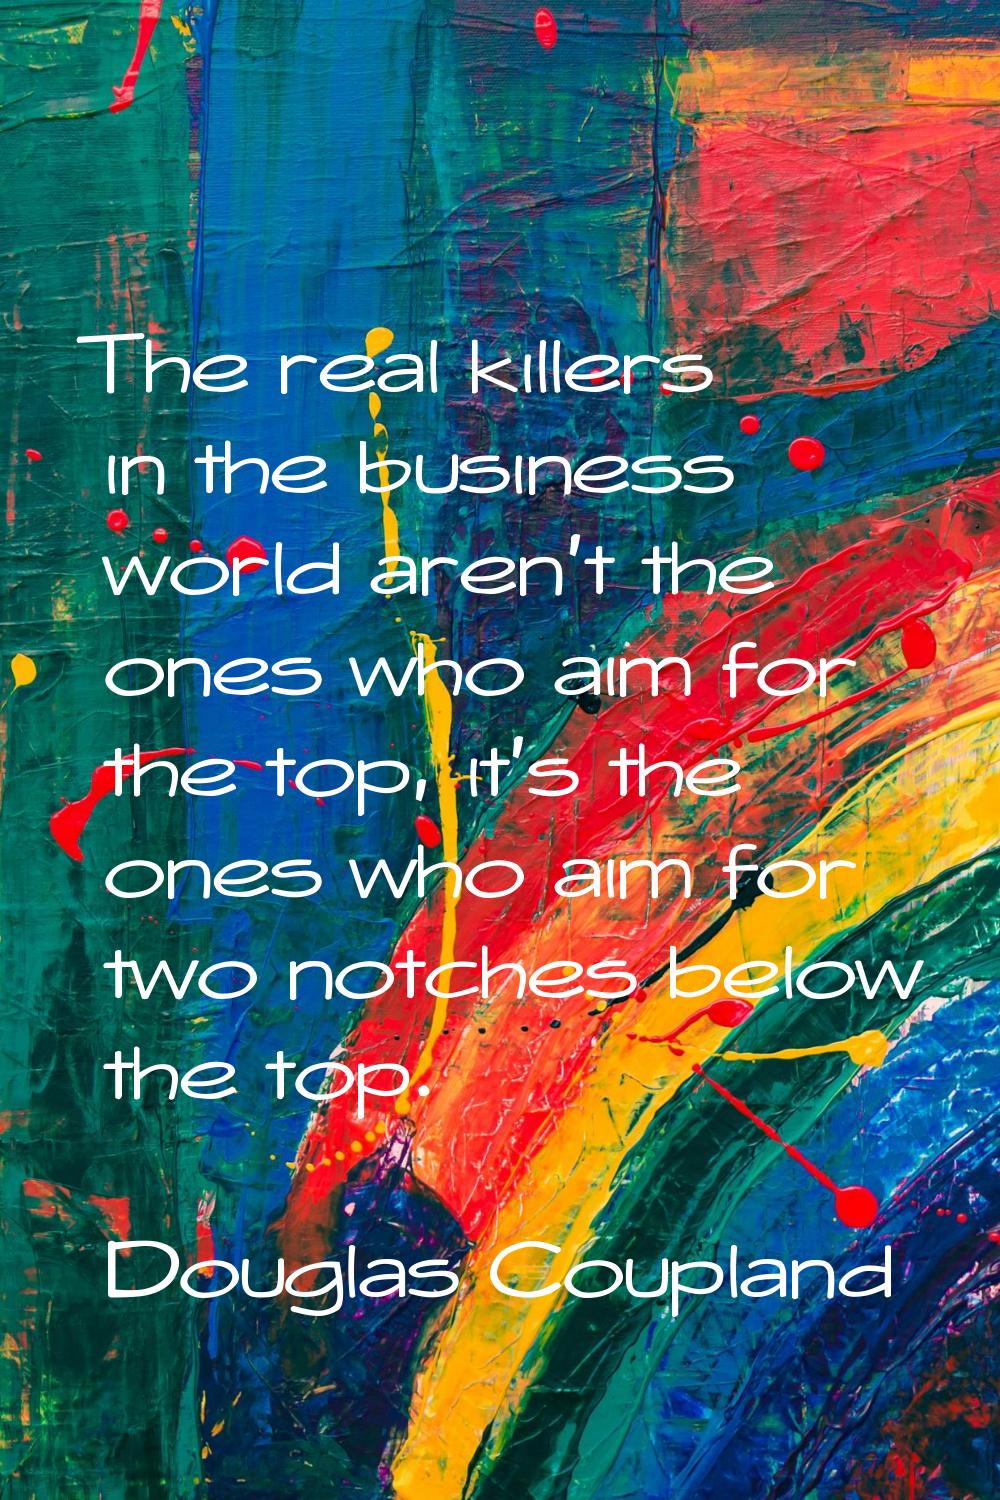 The real killers in the business world aren't the ones who aim for the top, it's the ones who aim f